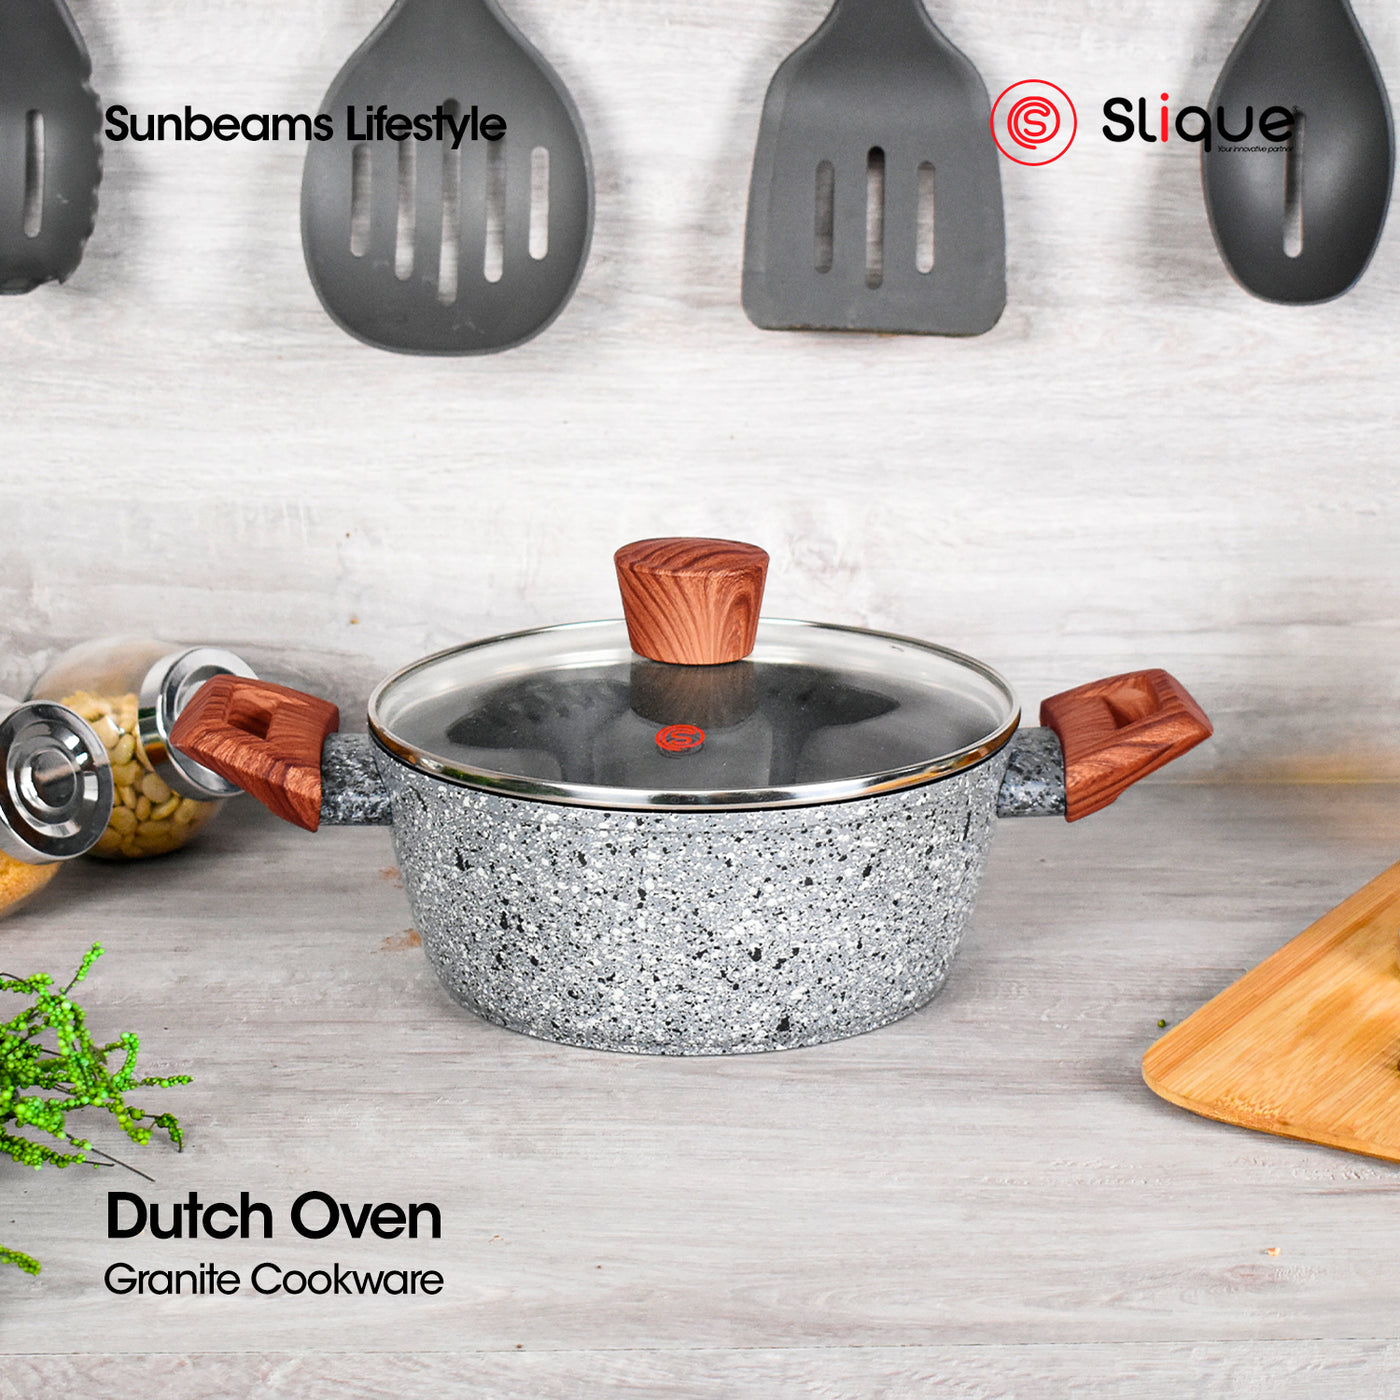 SLIQUE Granite Dutch Oven Multi Layer Non-Stick Coating Induction Base Wooden Finish Bakelite Handle Amazing Gift Idea For Any Occasion!